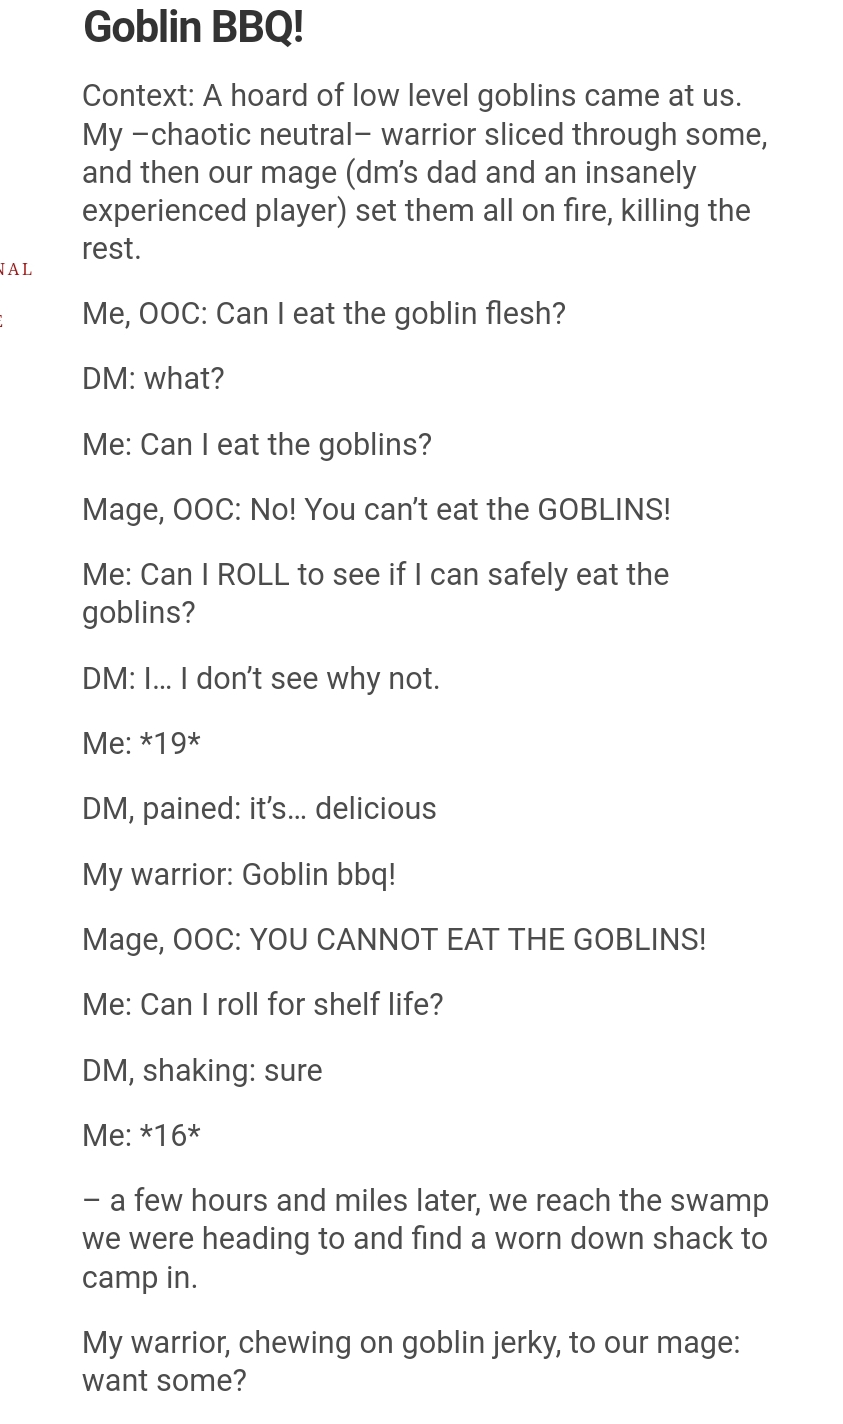 dnd memes when you set the town - Goblin Bbq! Context A hoard of low level goblins came at us. Mychaotic neutral warrior sliced through some, and then our mage dm's dad and an insanely experienced player set them all on fire, killing the rest. Jal Me, Ooc